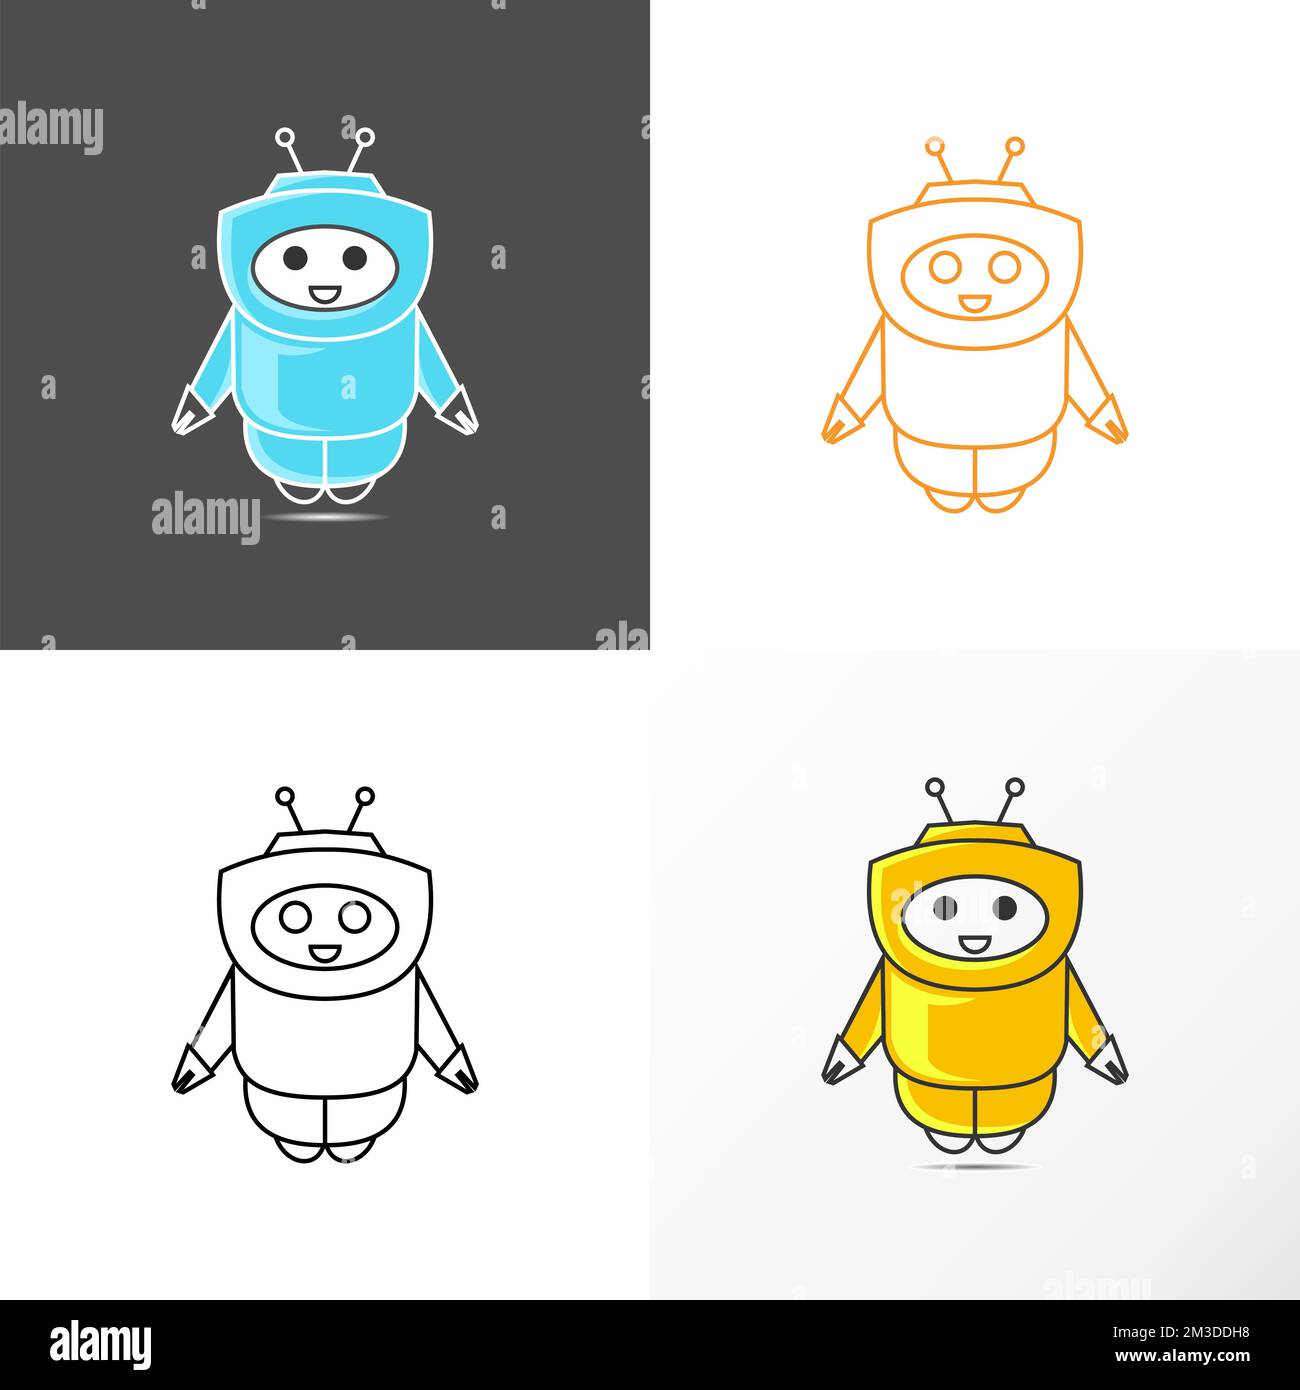 funny and unique robot with smiling sweetly image graphic icon logo design abstract concept vector stock. Can be used as a symbol related to tech Stock Vector